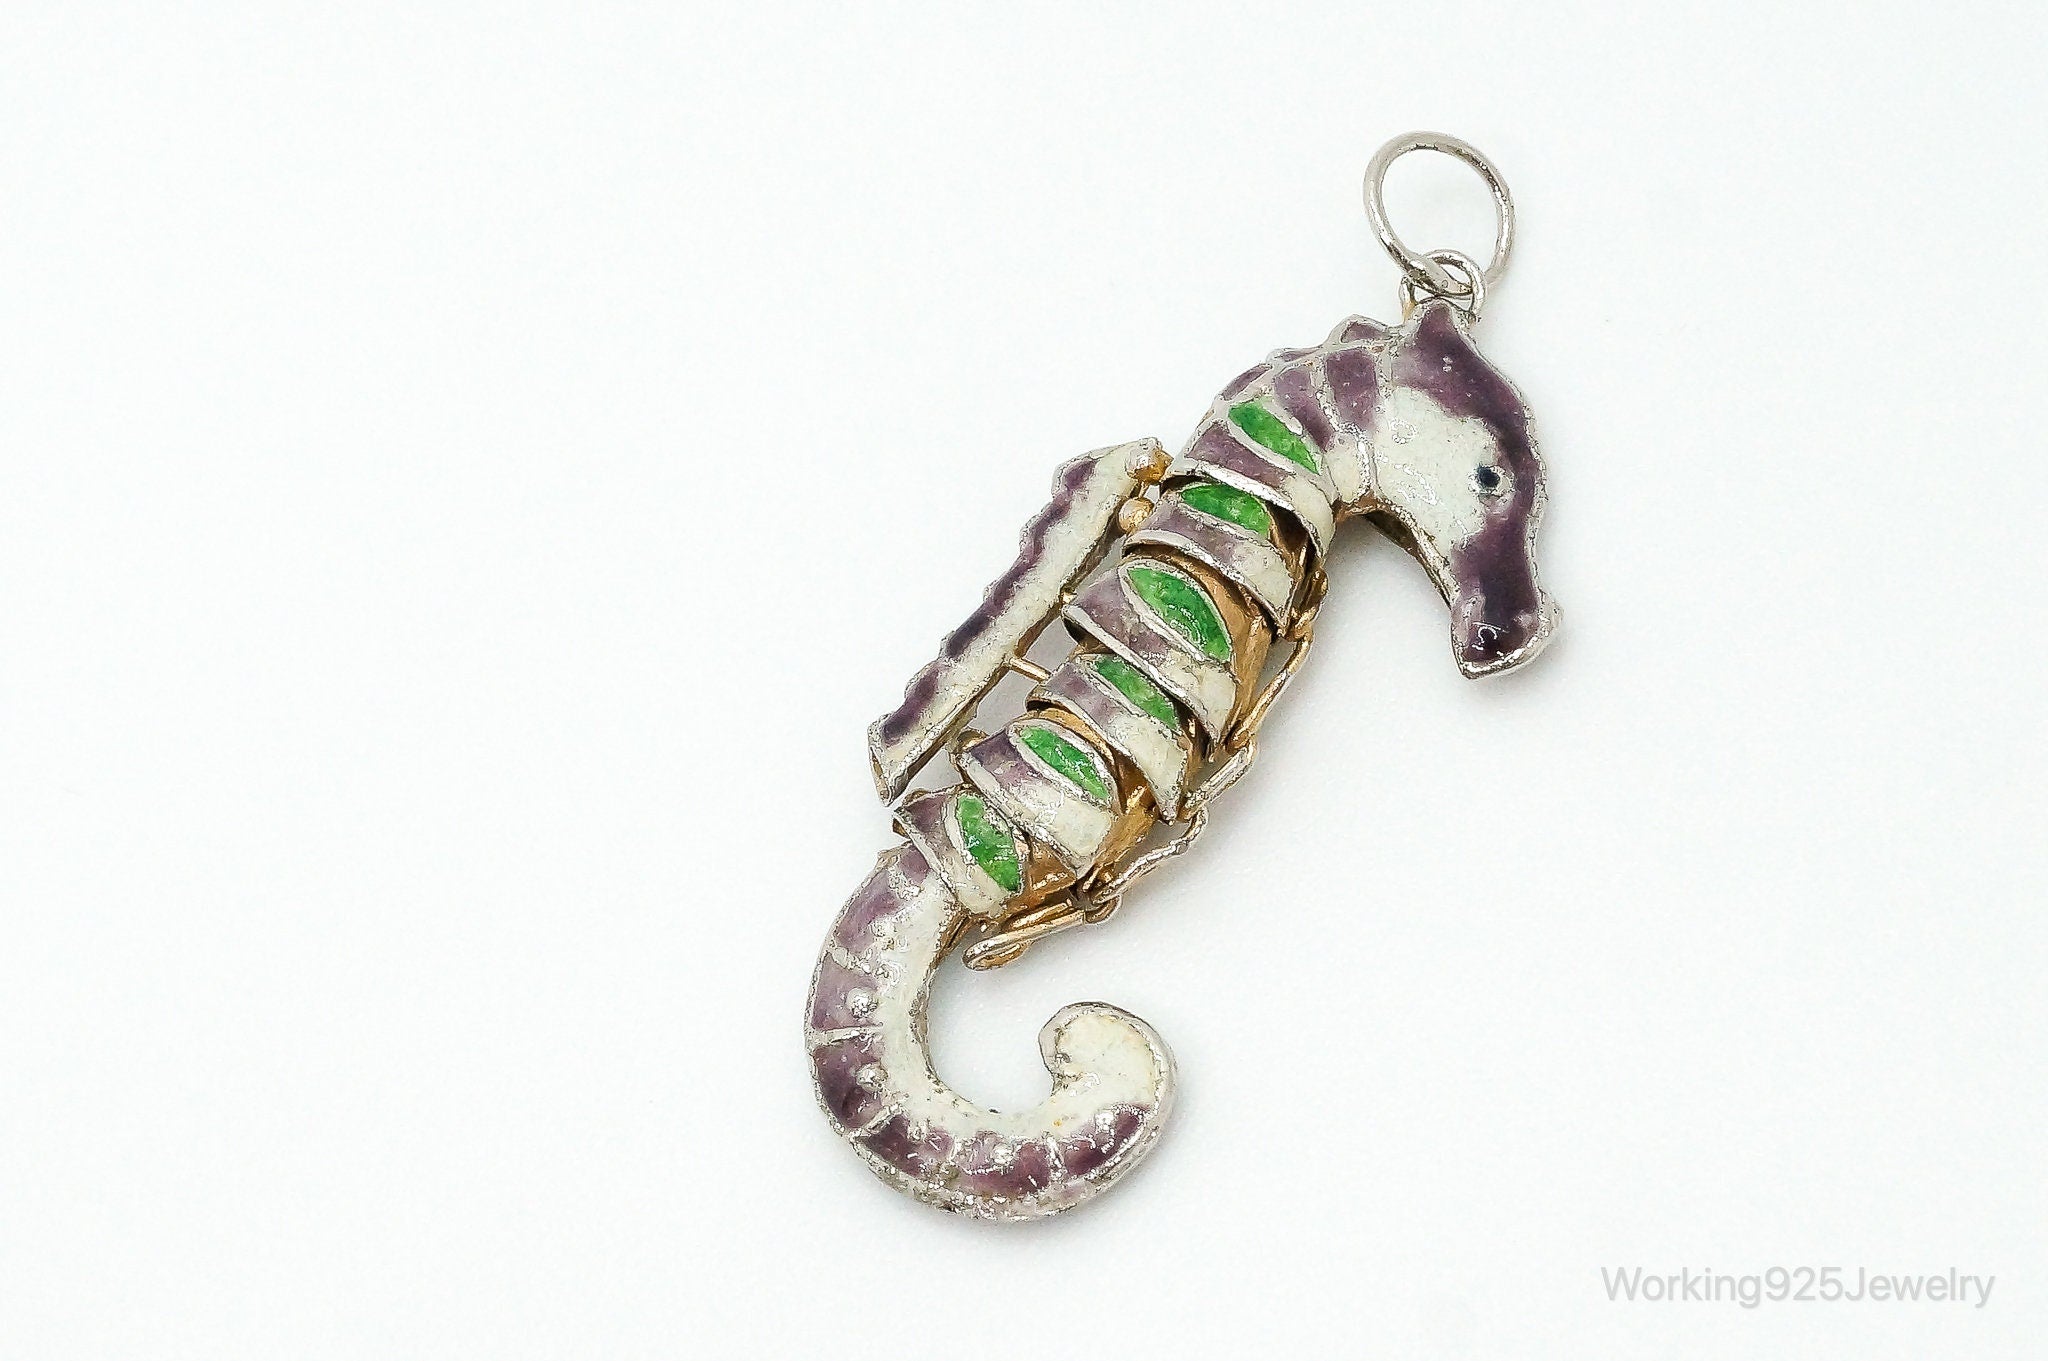 Antique Chinese Articulated Cloisonne Enameled Vermeil Silver Seahorse Pendant